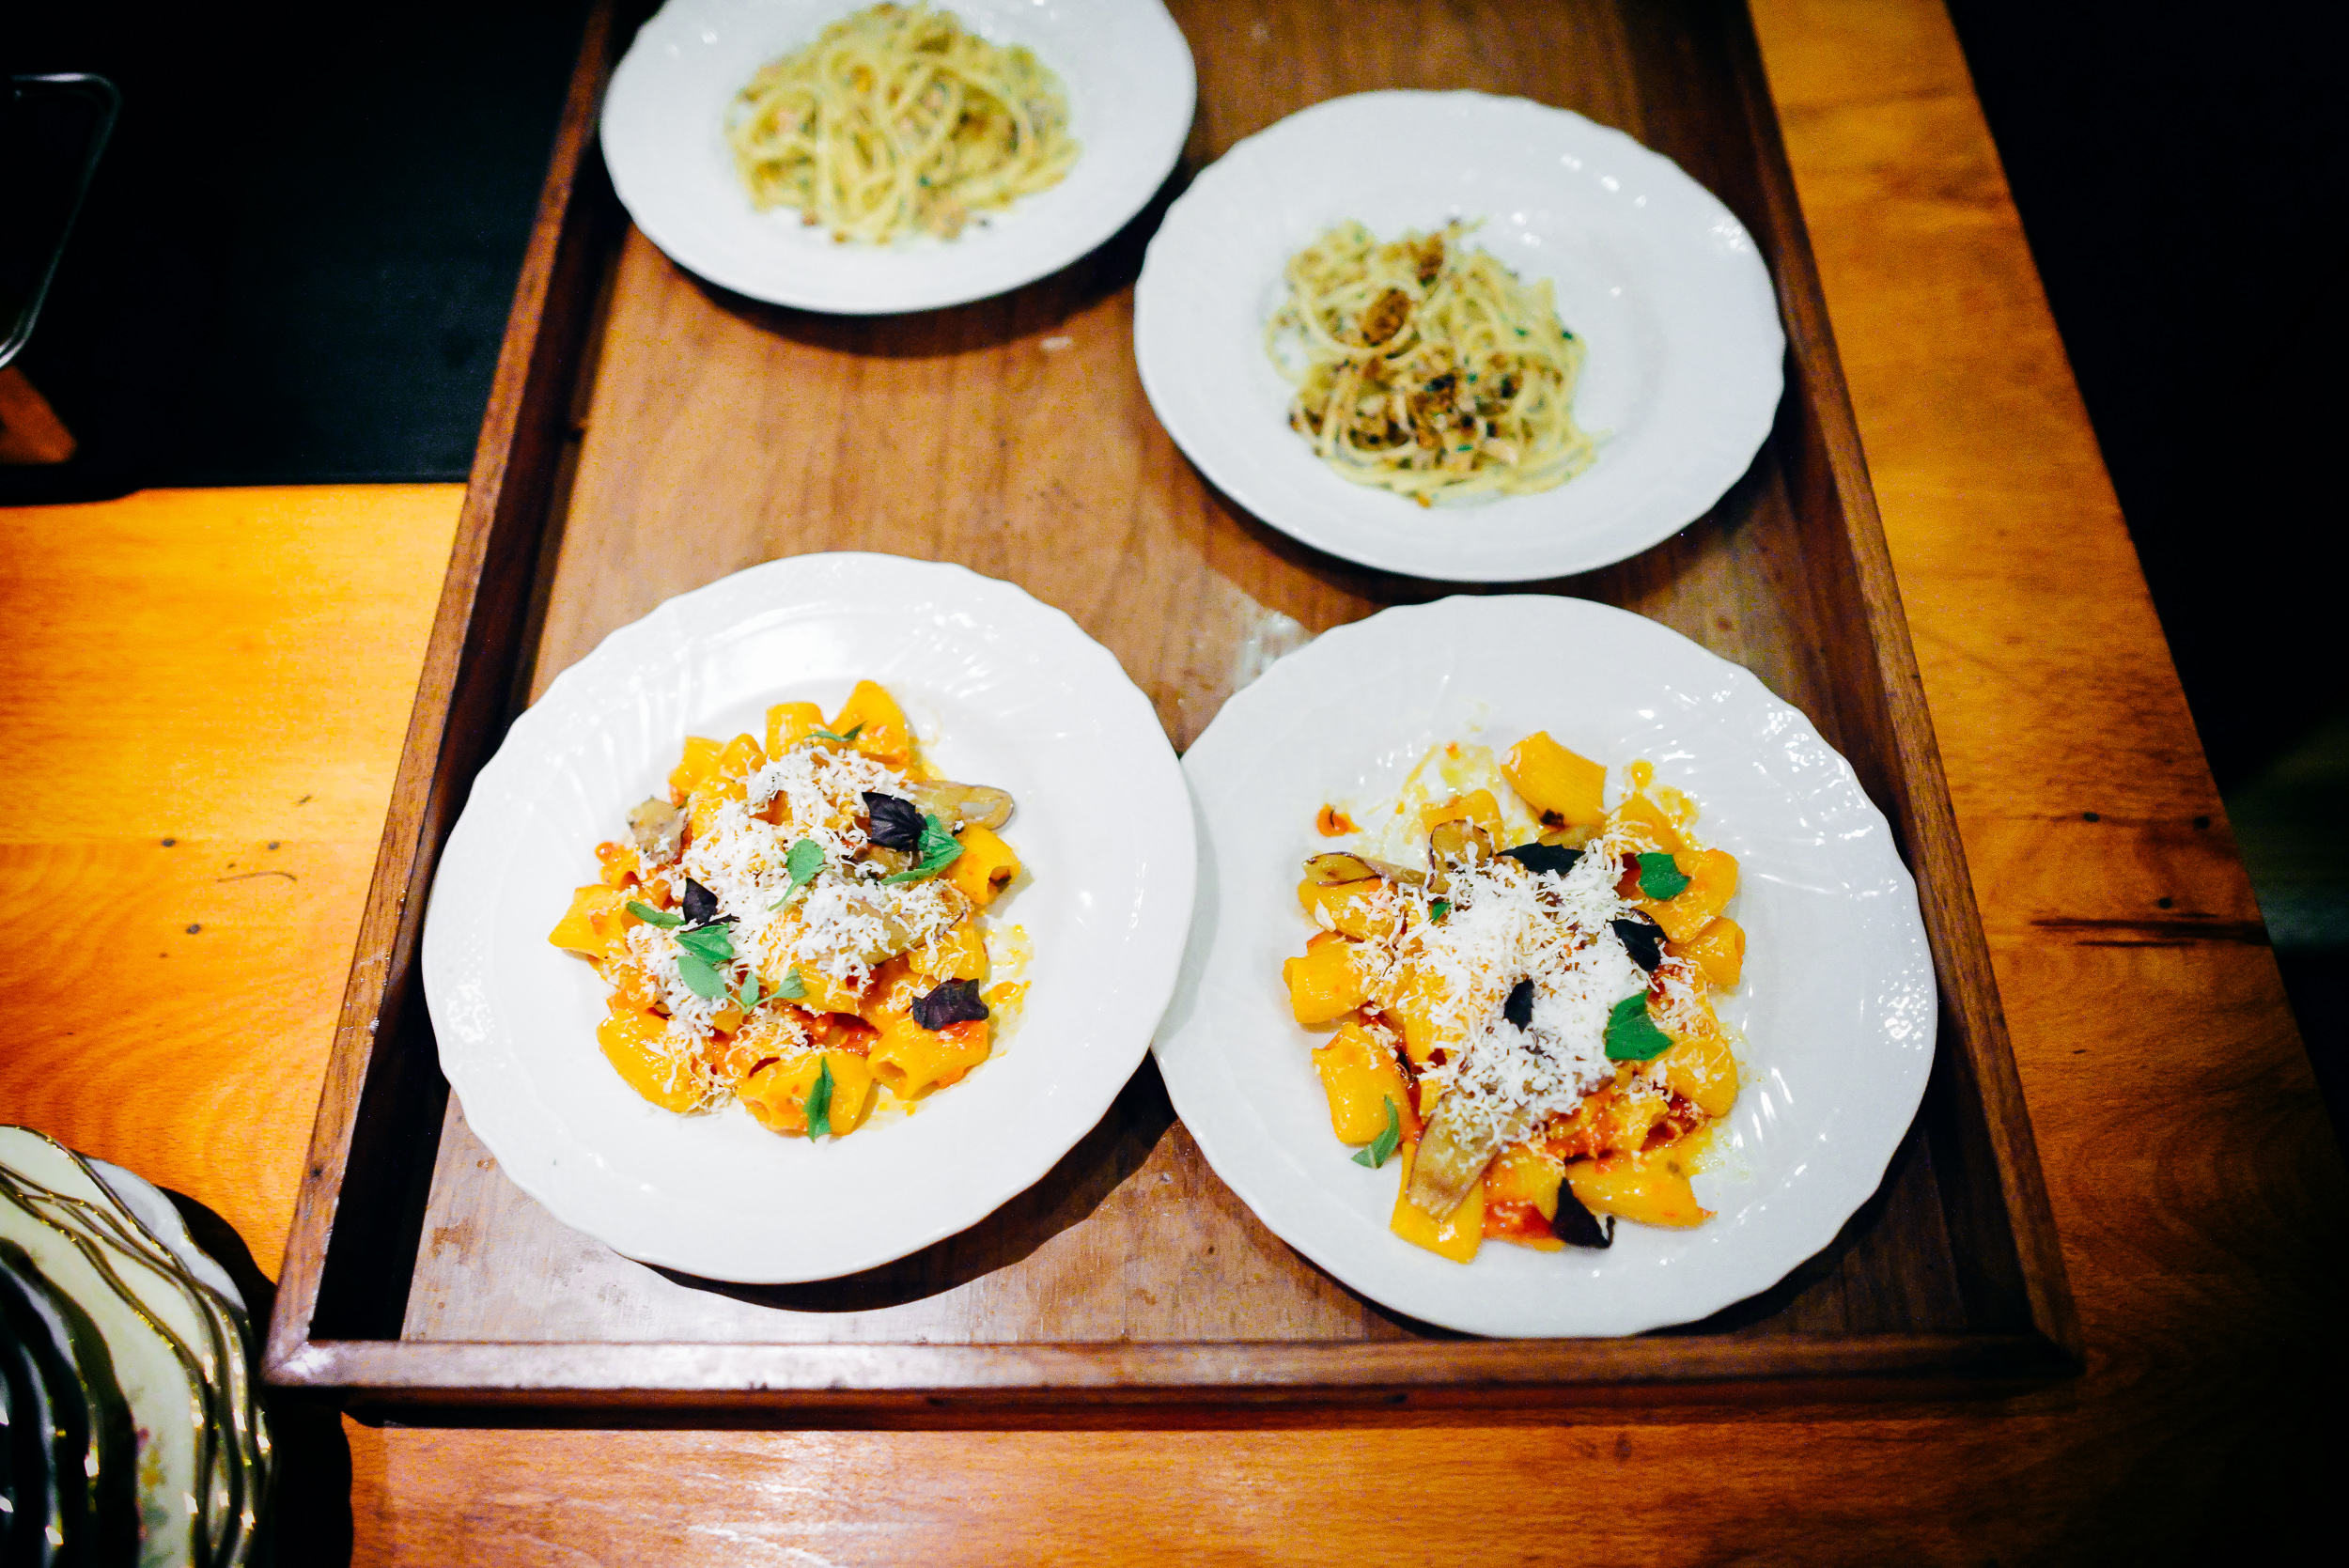 House-made pastas: Linguine with clams, burnt pizza dough crumb;